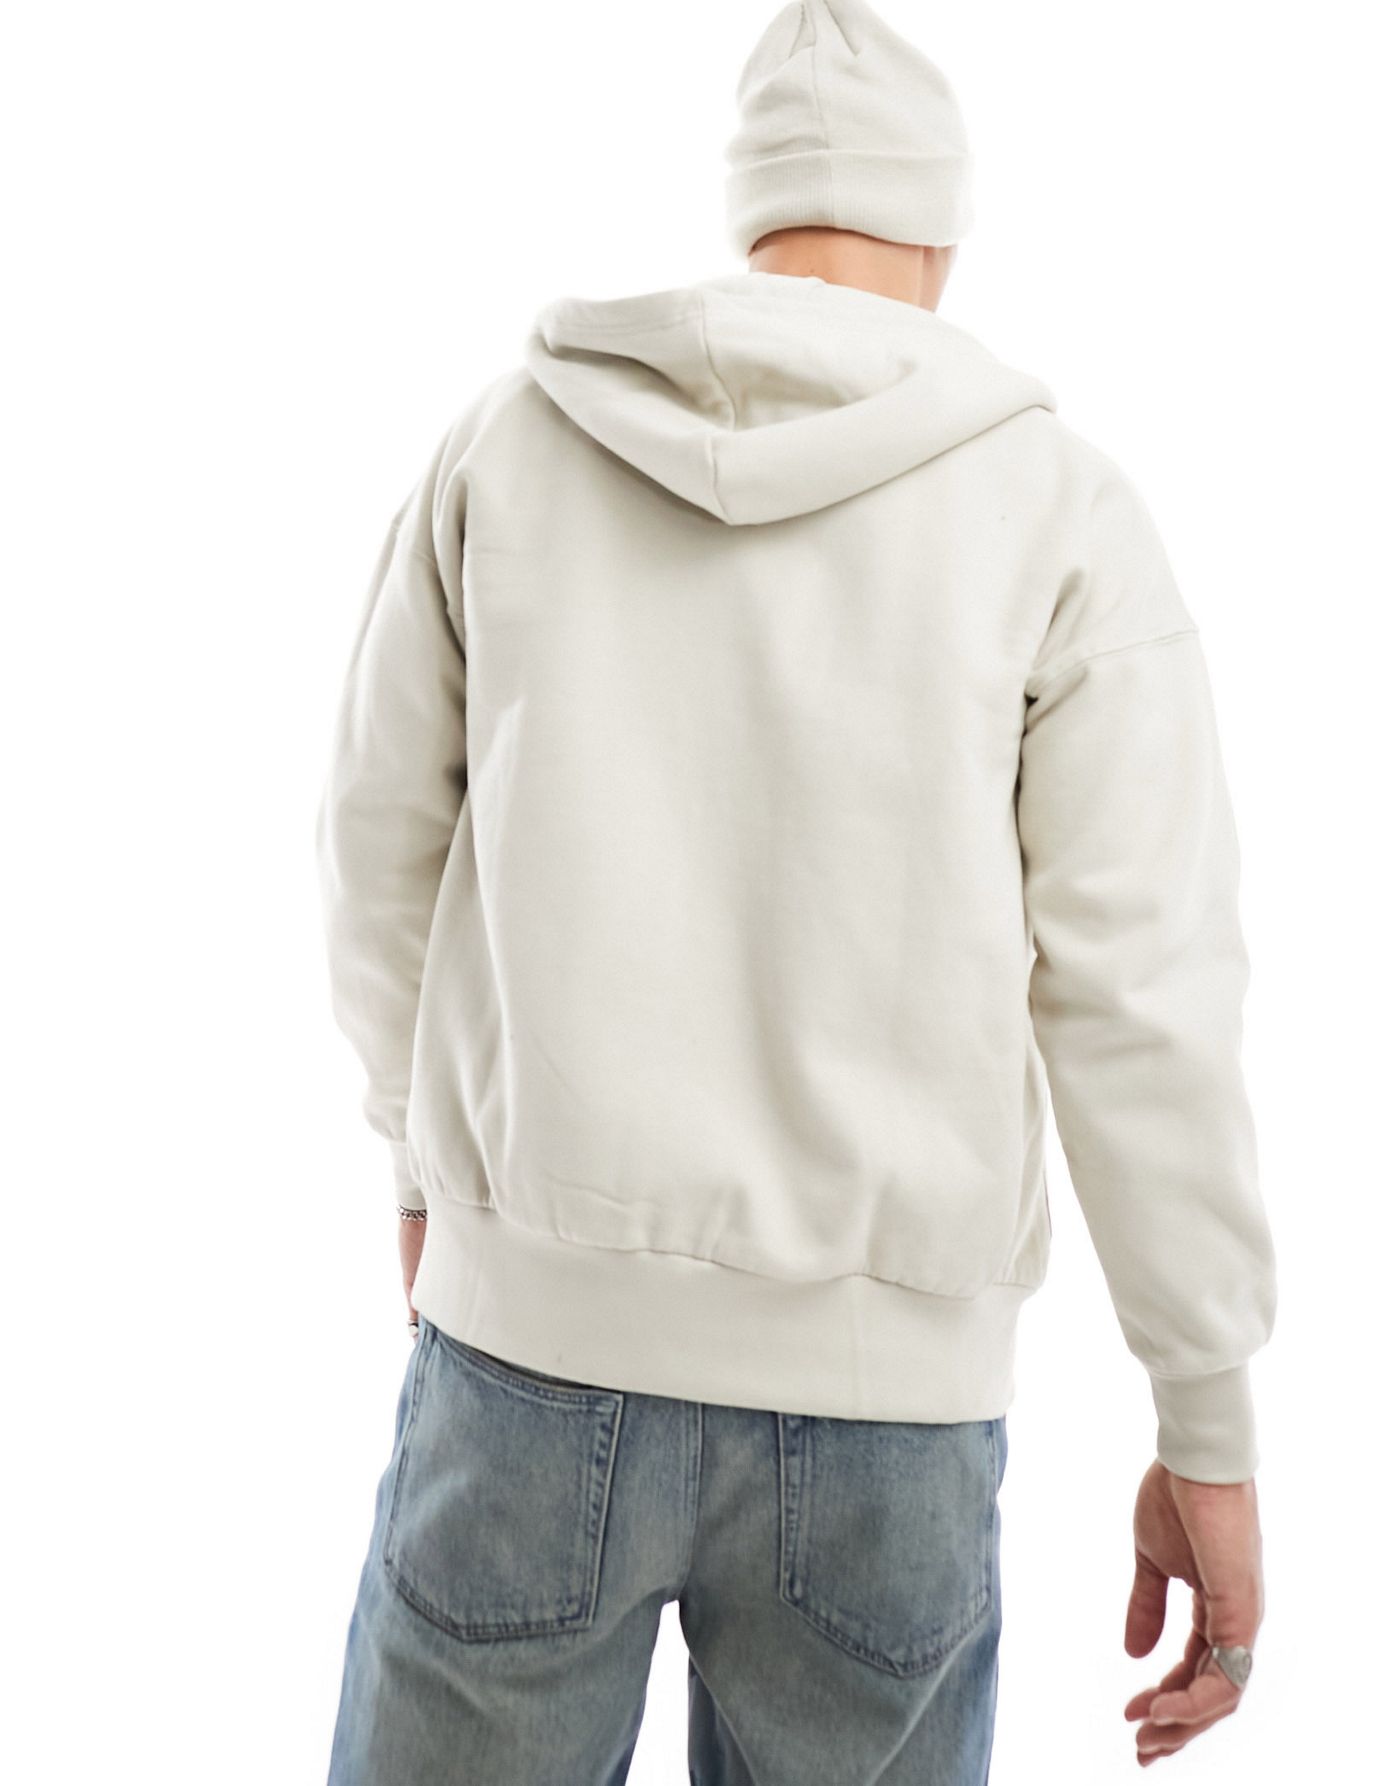 ONLY & SONS heavyweight zip through hoodie in stone